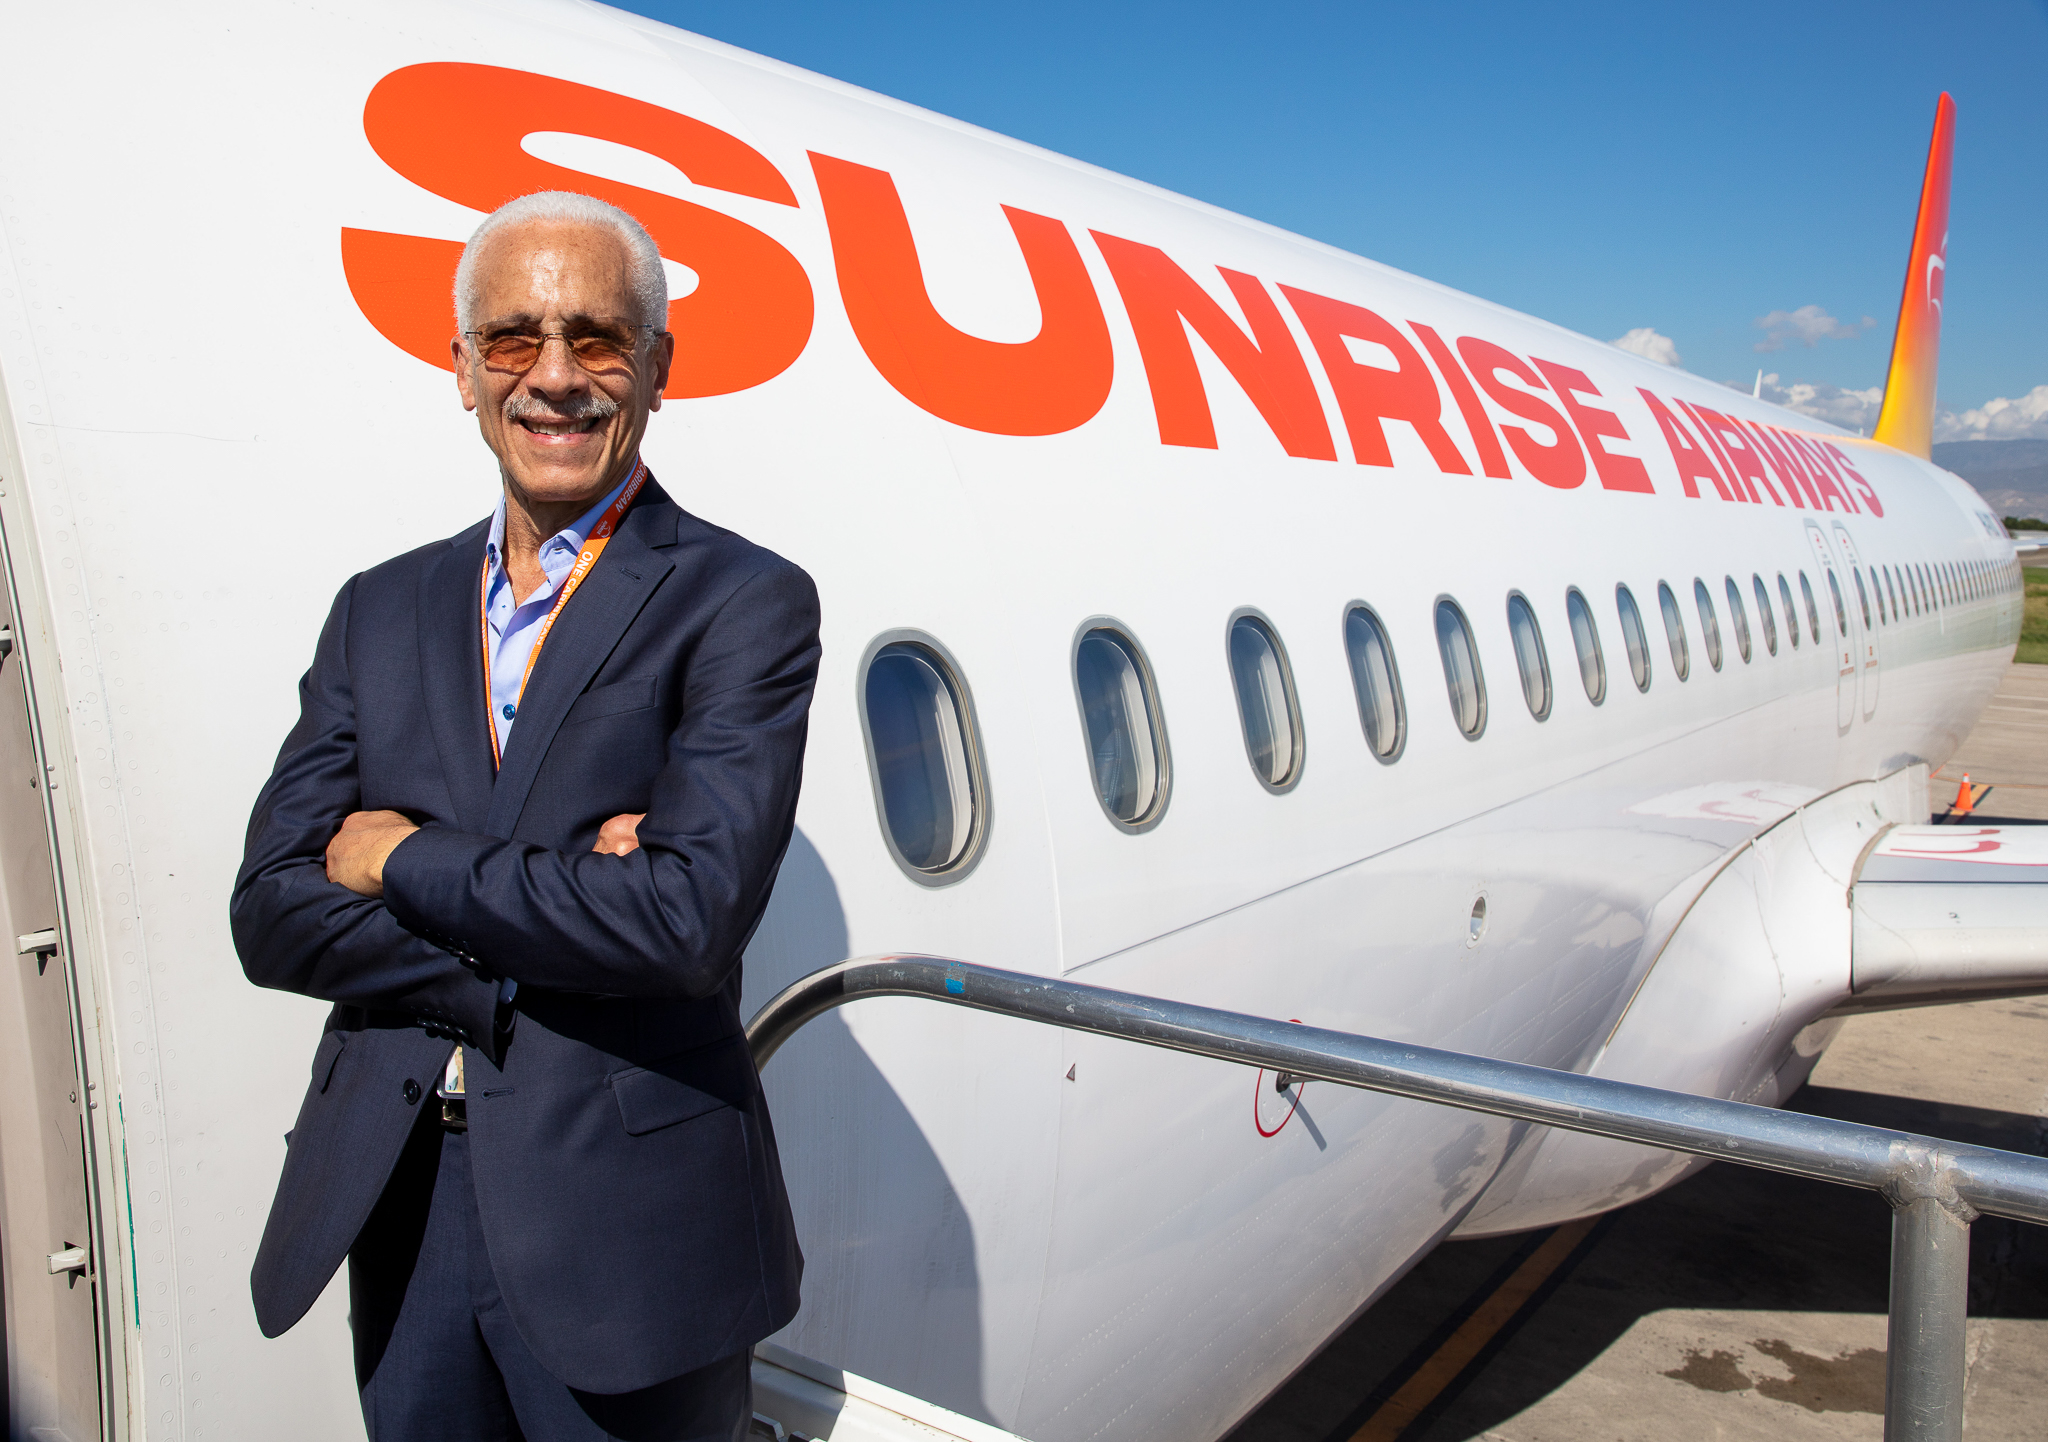 Sunrise Airways Spreads Its Wings To The Eastern Caribbean